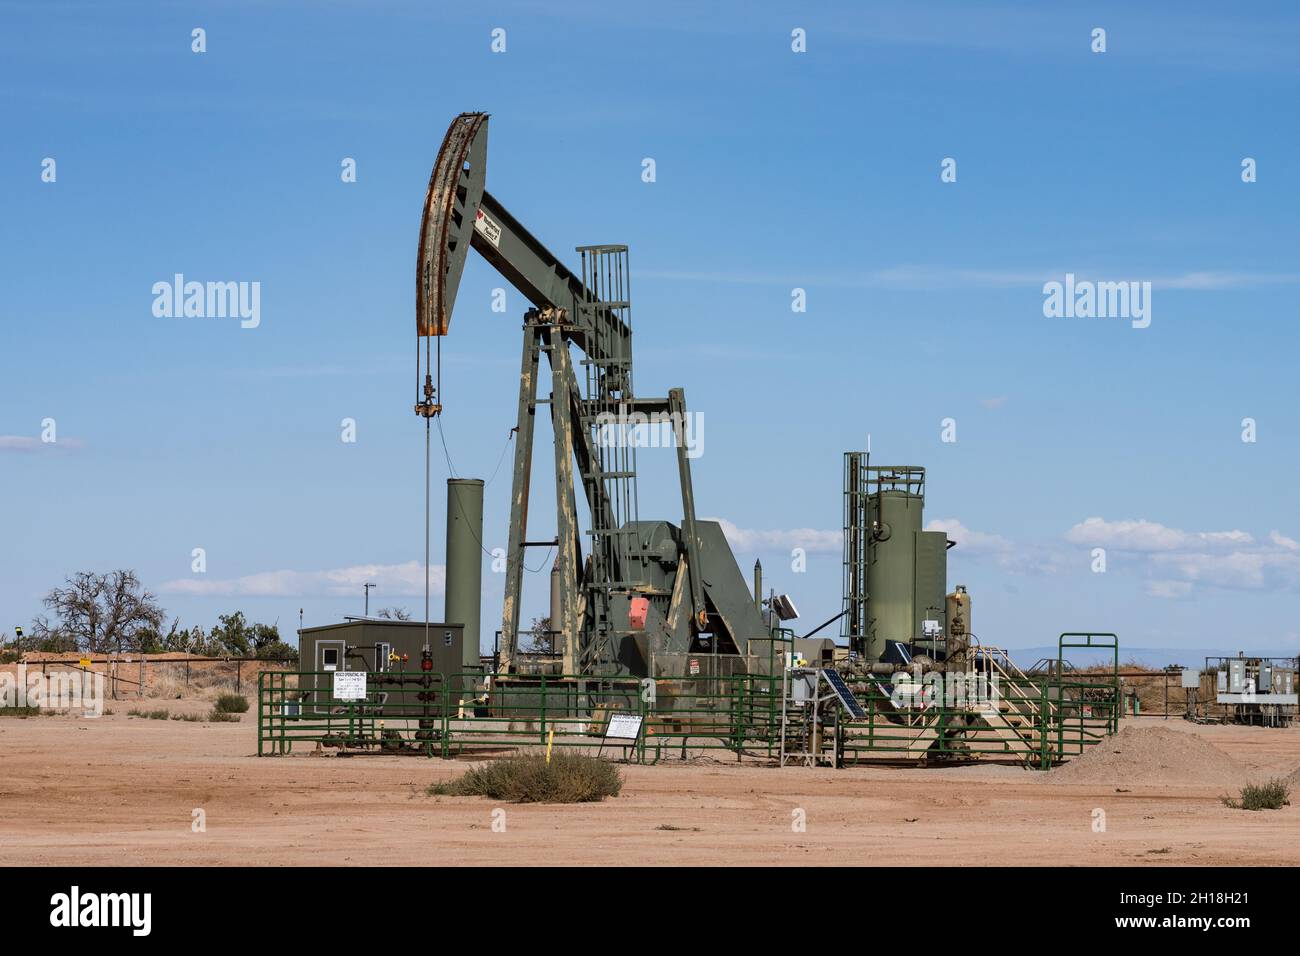 A conventional horsehead oil well pump jack unit and heater treaters on an oil well site in Utah. Stock Photo